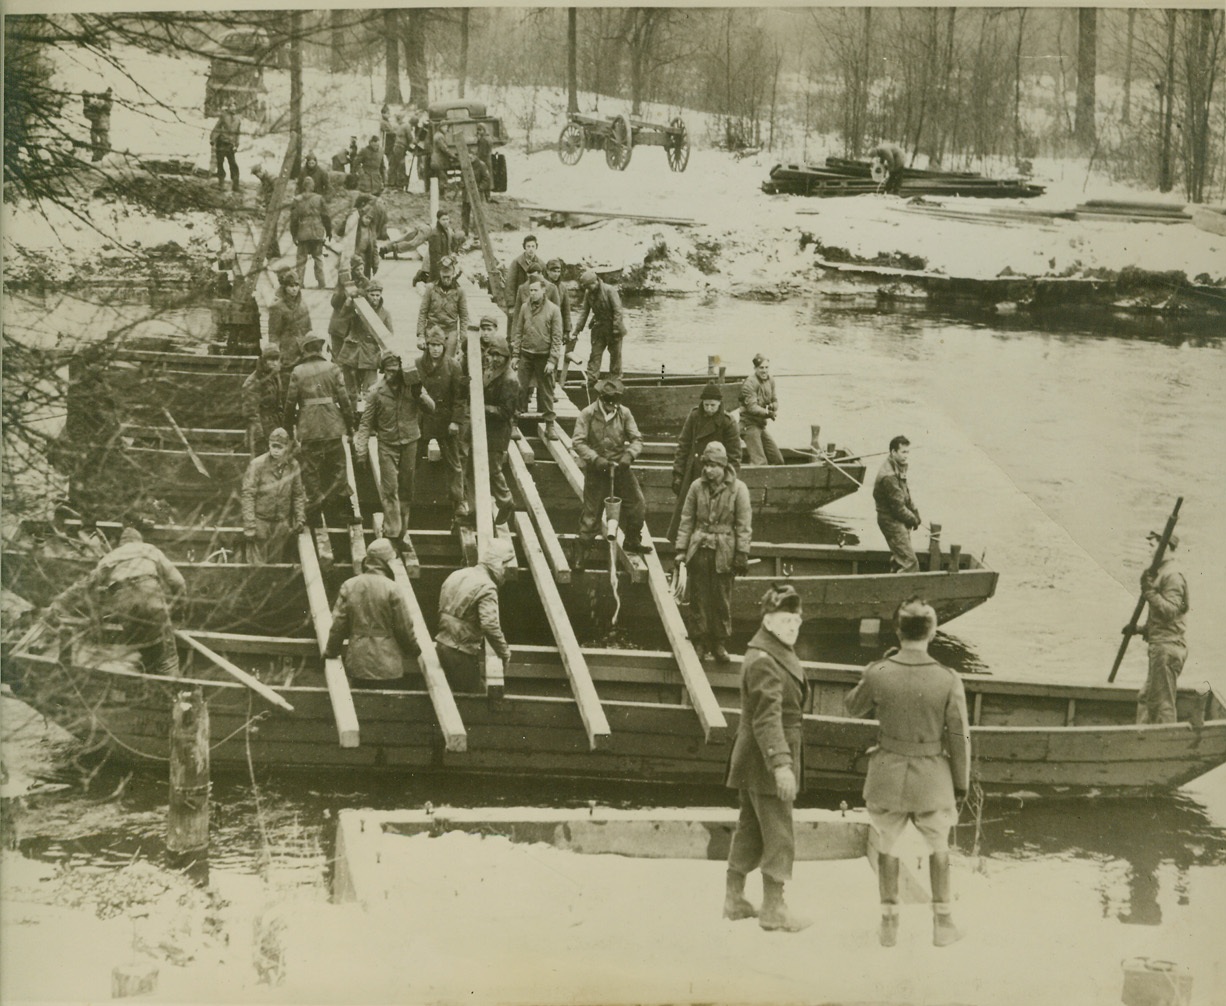 BRIDGES MADE WHILE YOU WAIT, 1/17/1940  FORT CUSTER, MICH. – When HQ of 5th Division found they needed a bridge across the Kalamazoo River to have access to Fort water they didn’t wait for the new steel bridge to be finished. Using available material and 15-year-old pontoons, the engineers had this bridge ready in three hours. Credit: OWI Radiophoto from ACME;